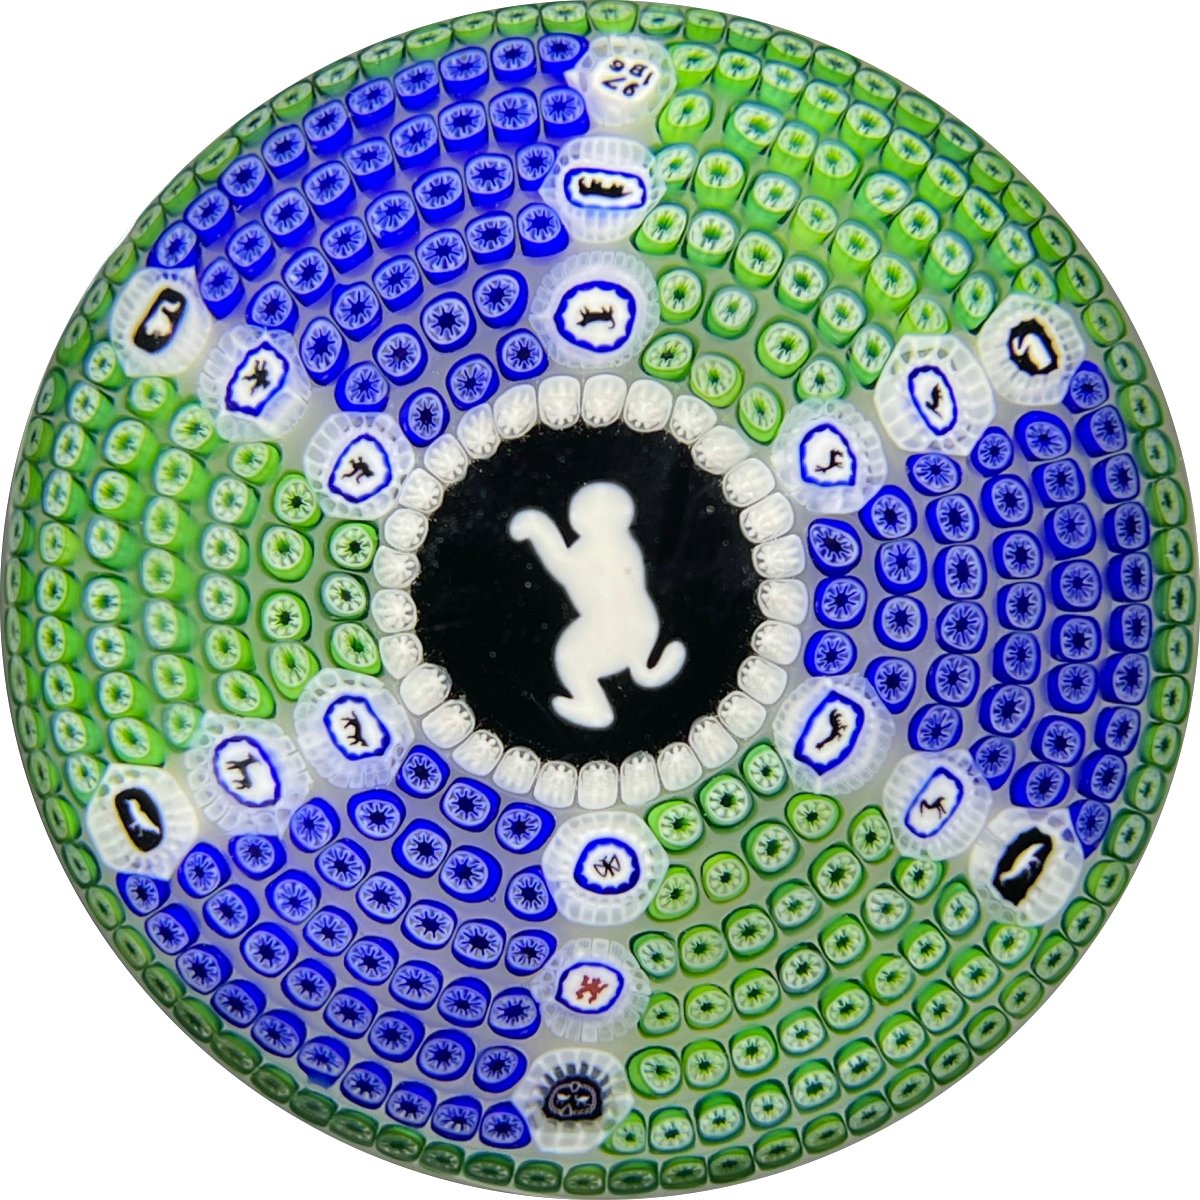 Baccarat Crystal 1976 LE Singe Blanc Gridel White Monkey Murrine With Paneled Concentric Millefiori and 17 Silhouette Canes